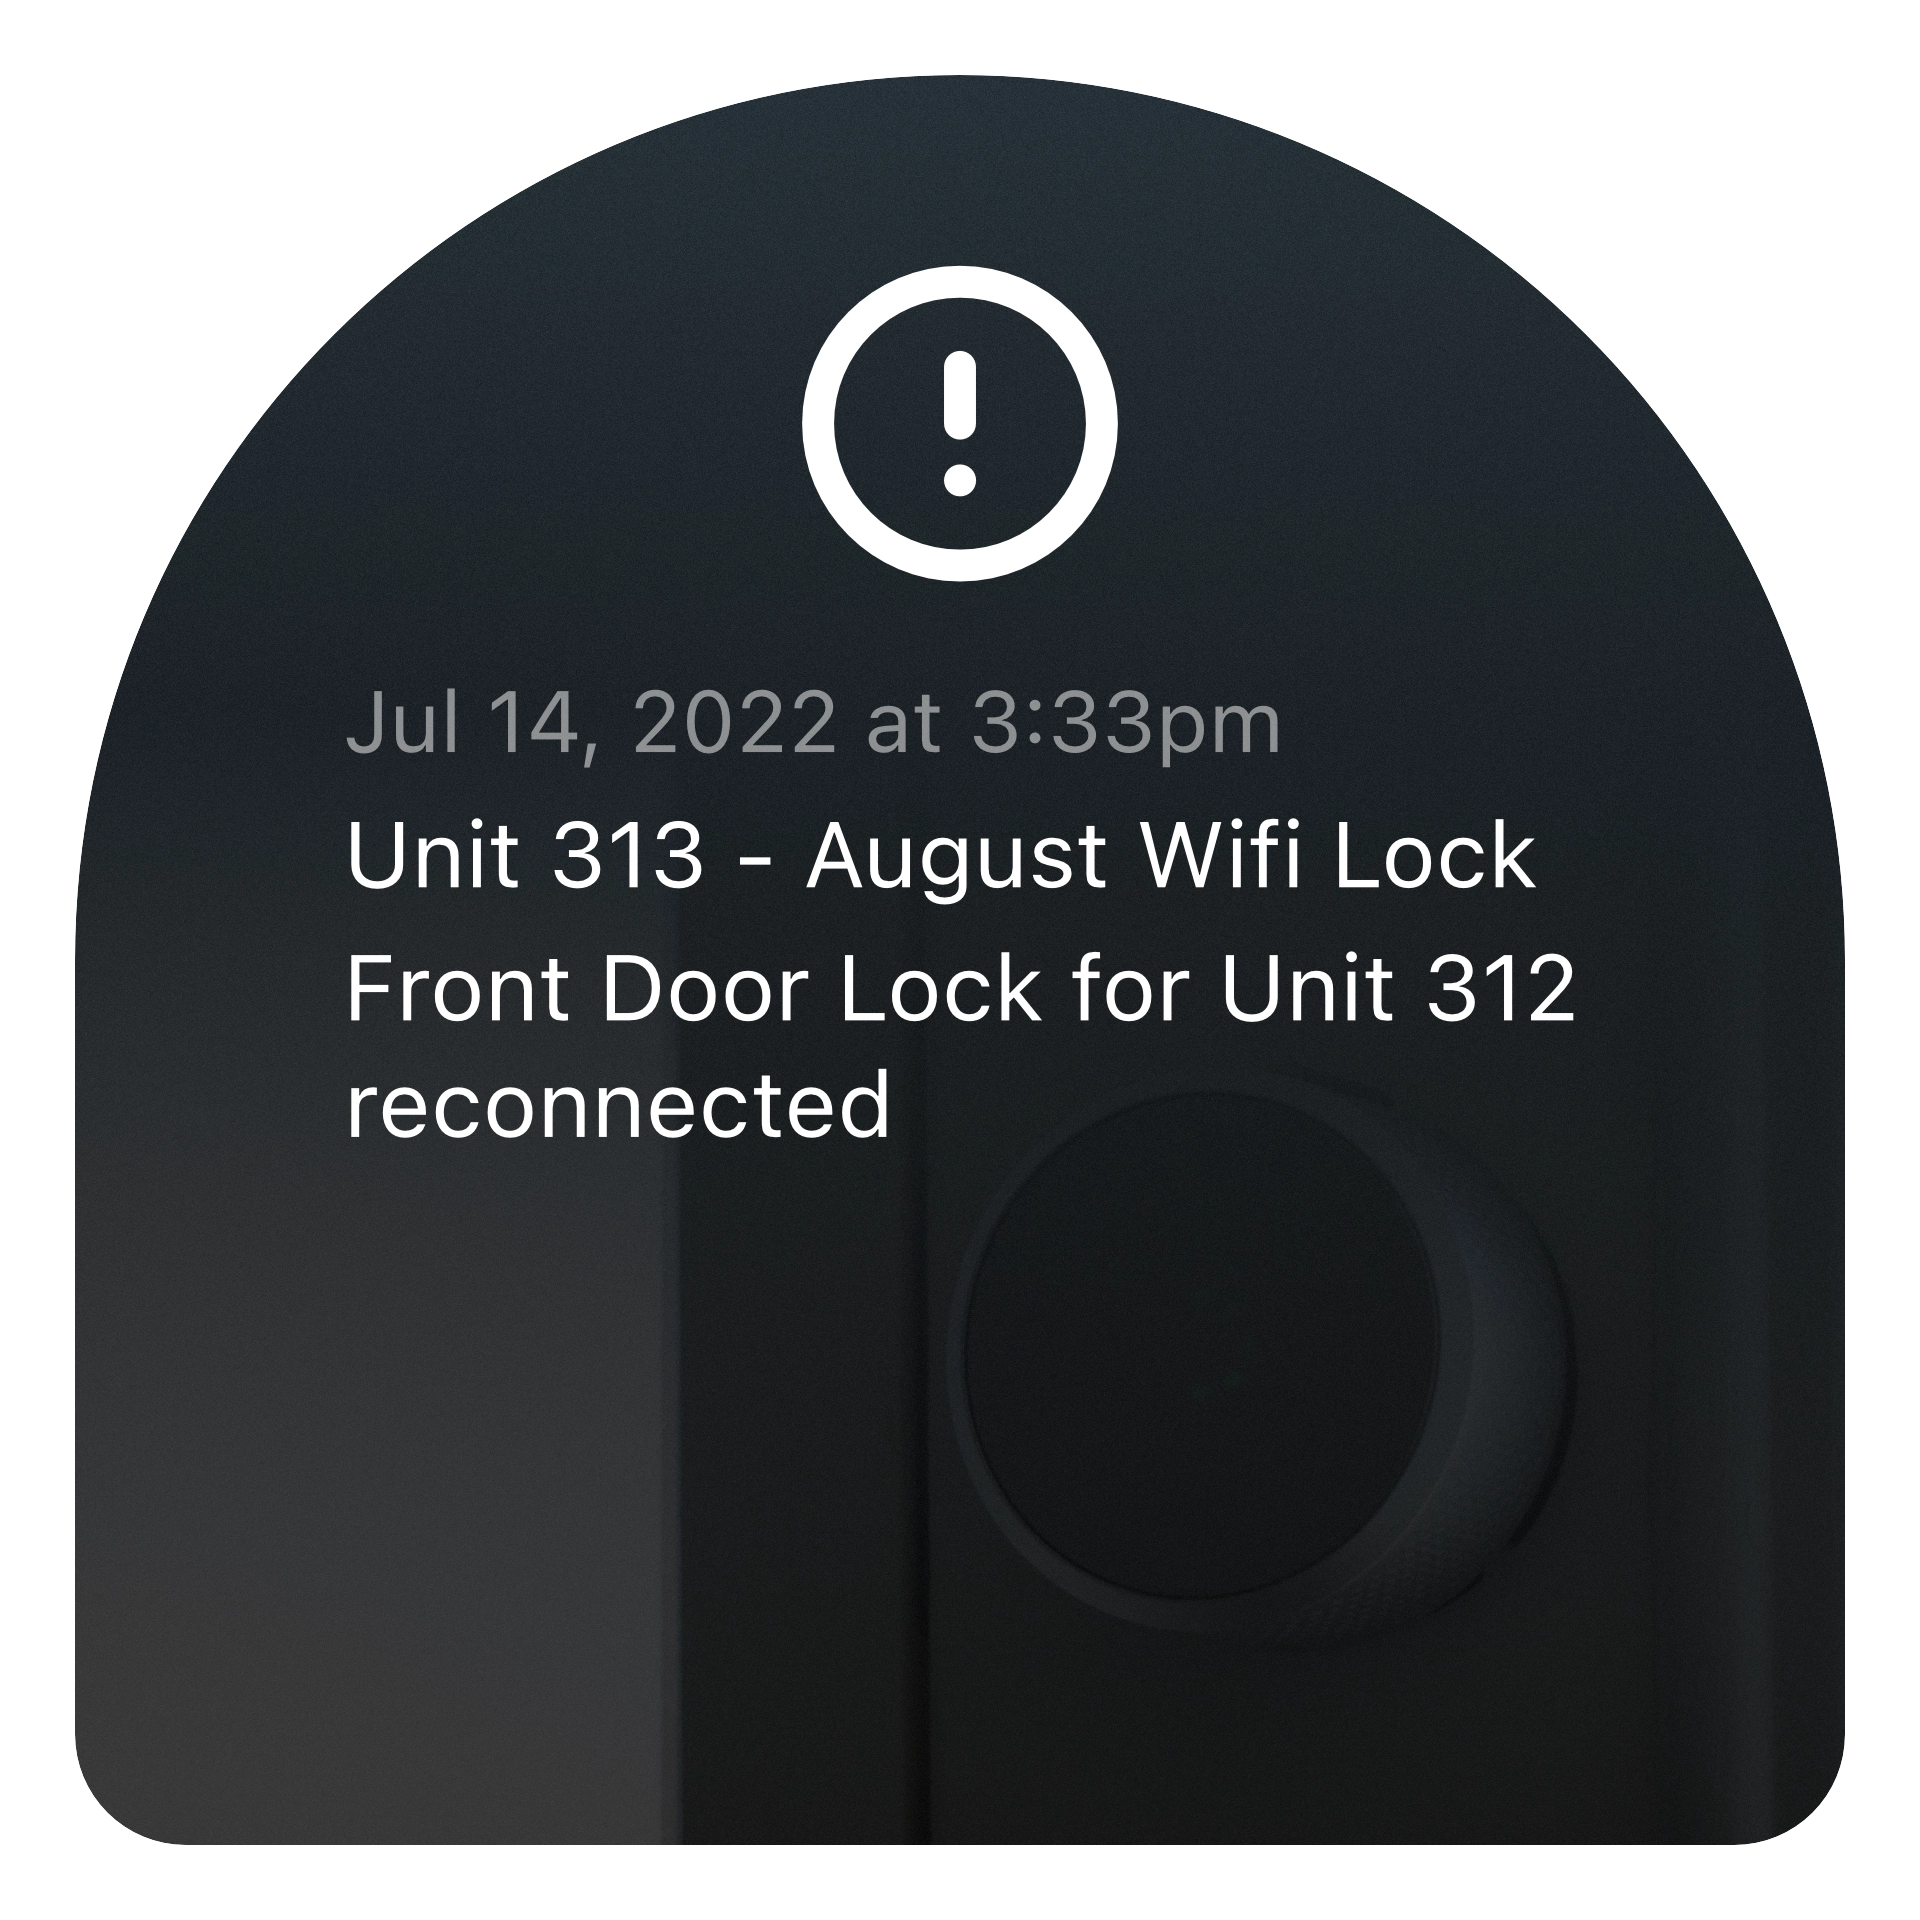 An alert received by the host when a smart lock is used